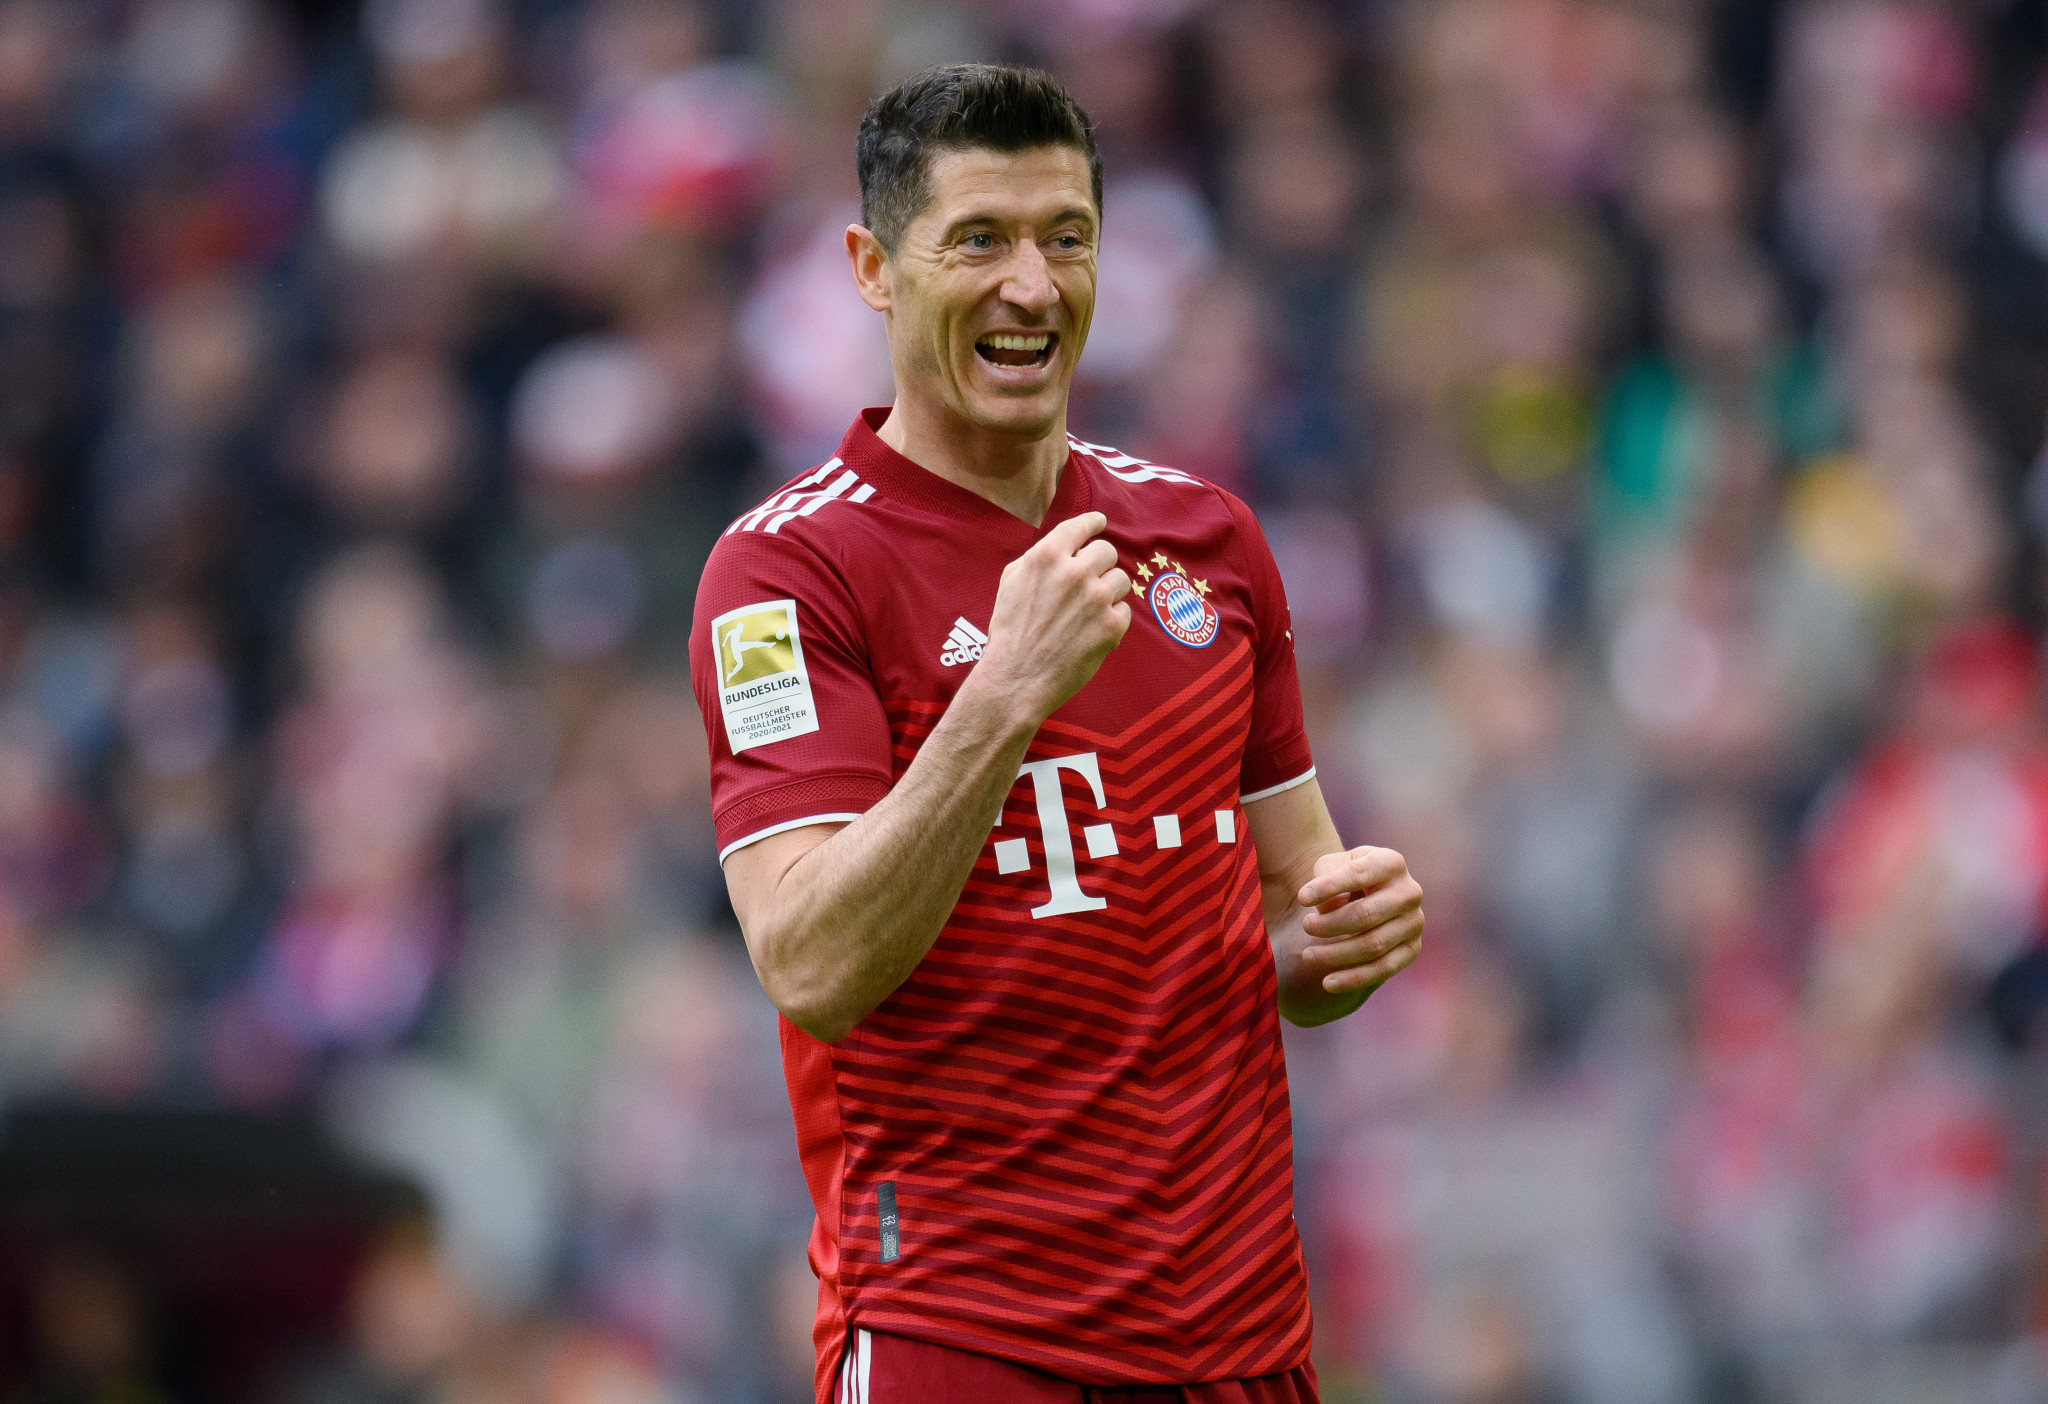 Robert Lewandowski is regarded as one of the most prolific strikers in football ©Getty Images